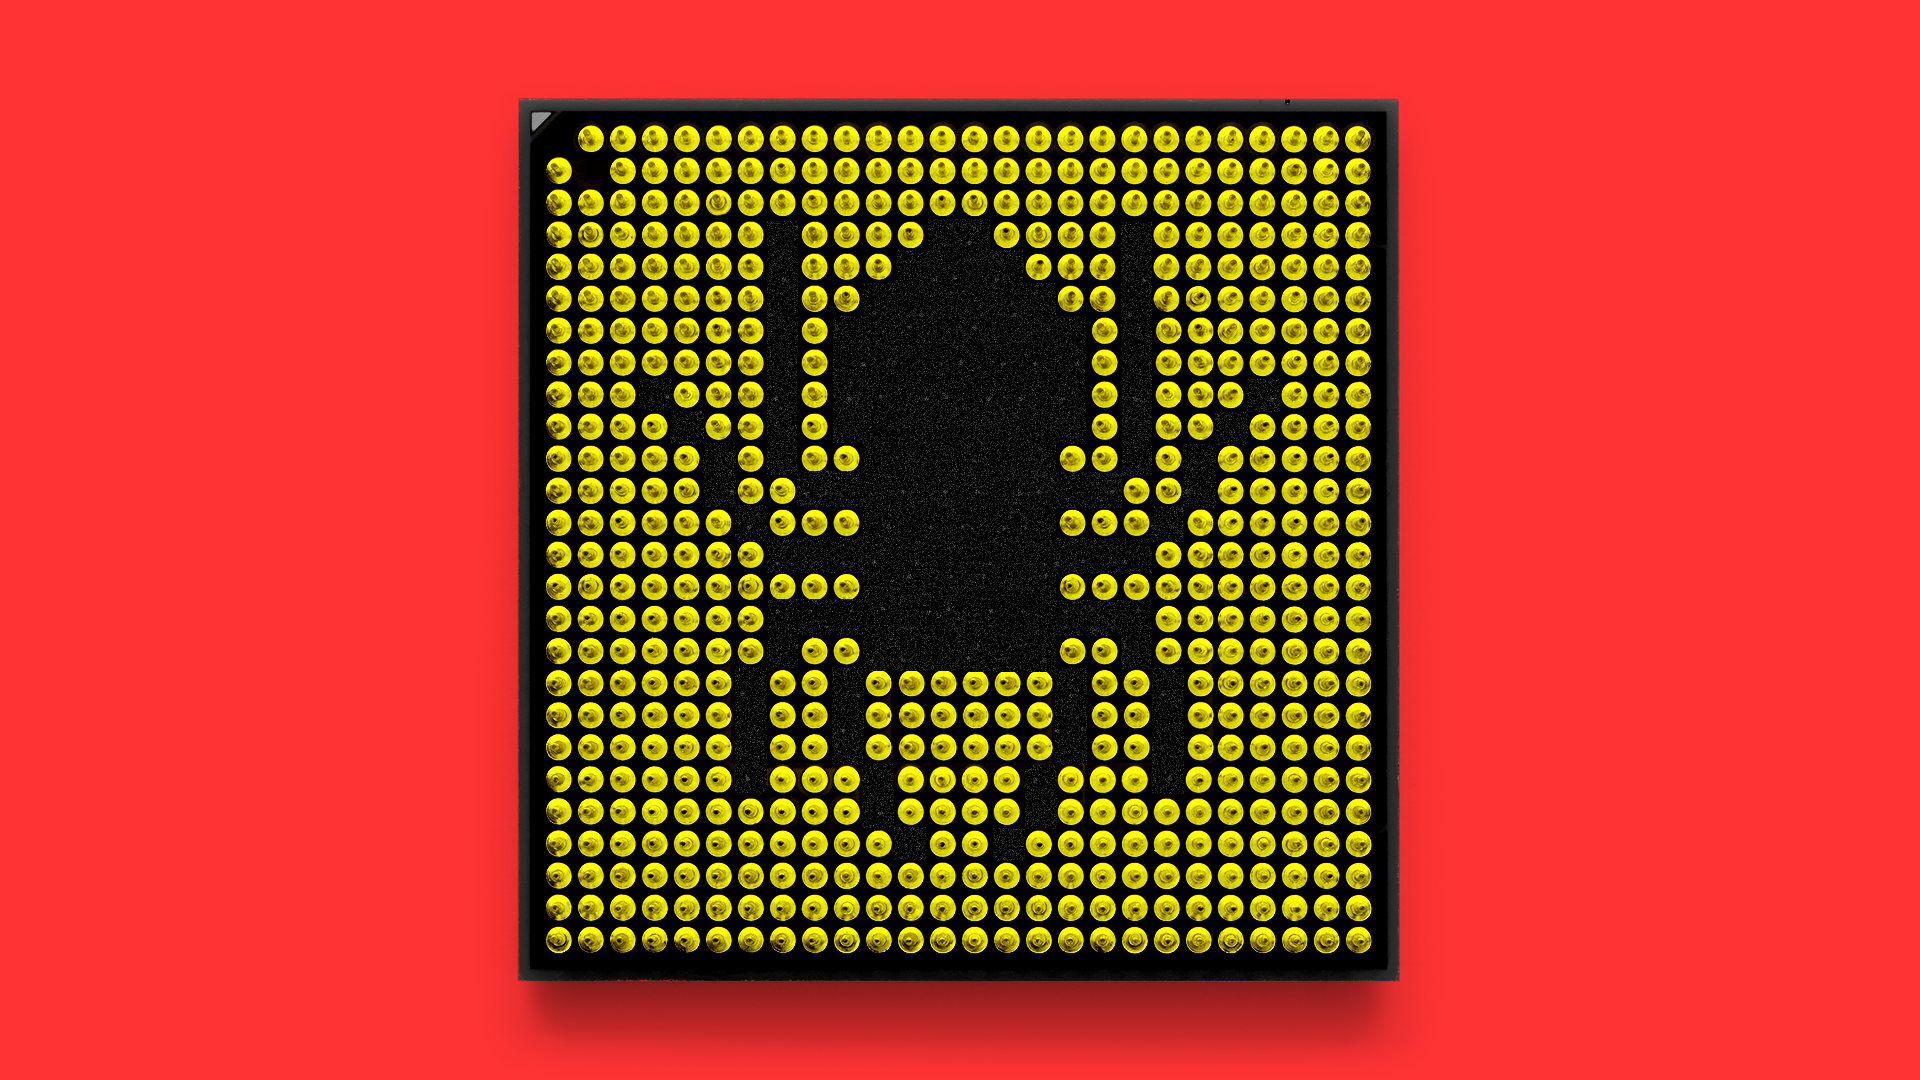 Outline of a bug on a computer chip, against a red background